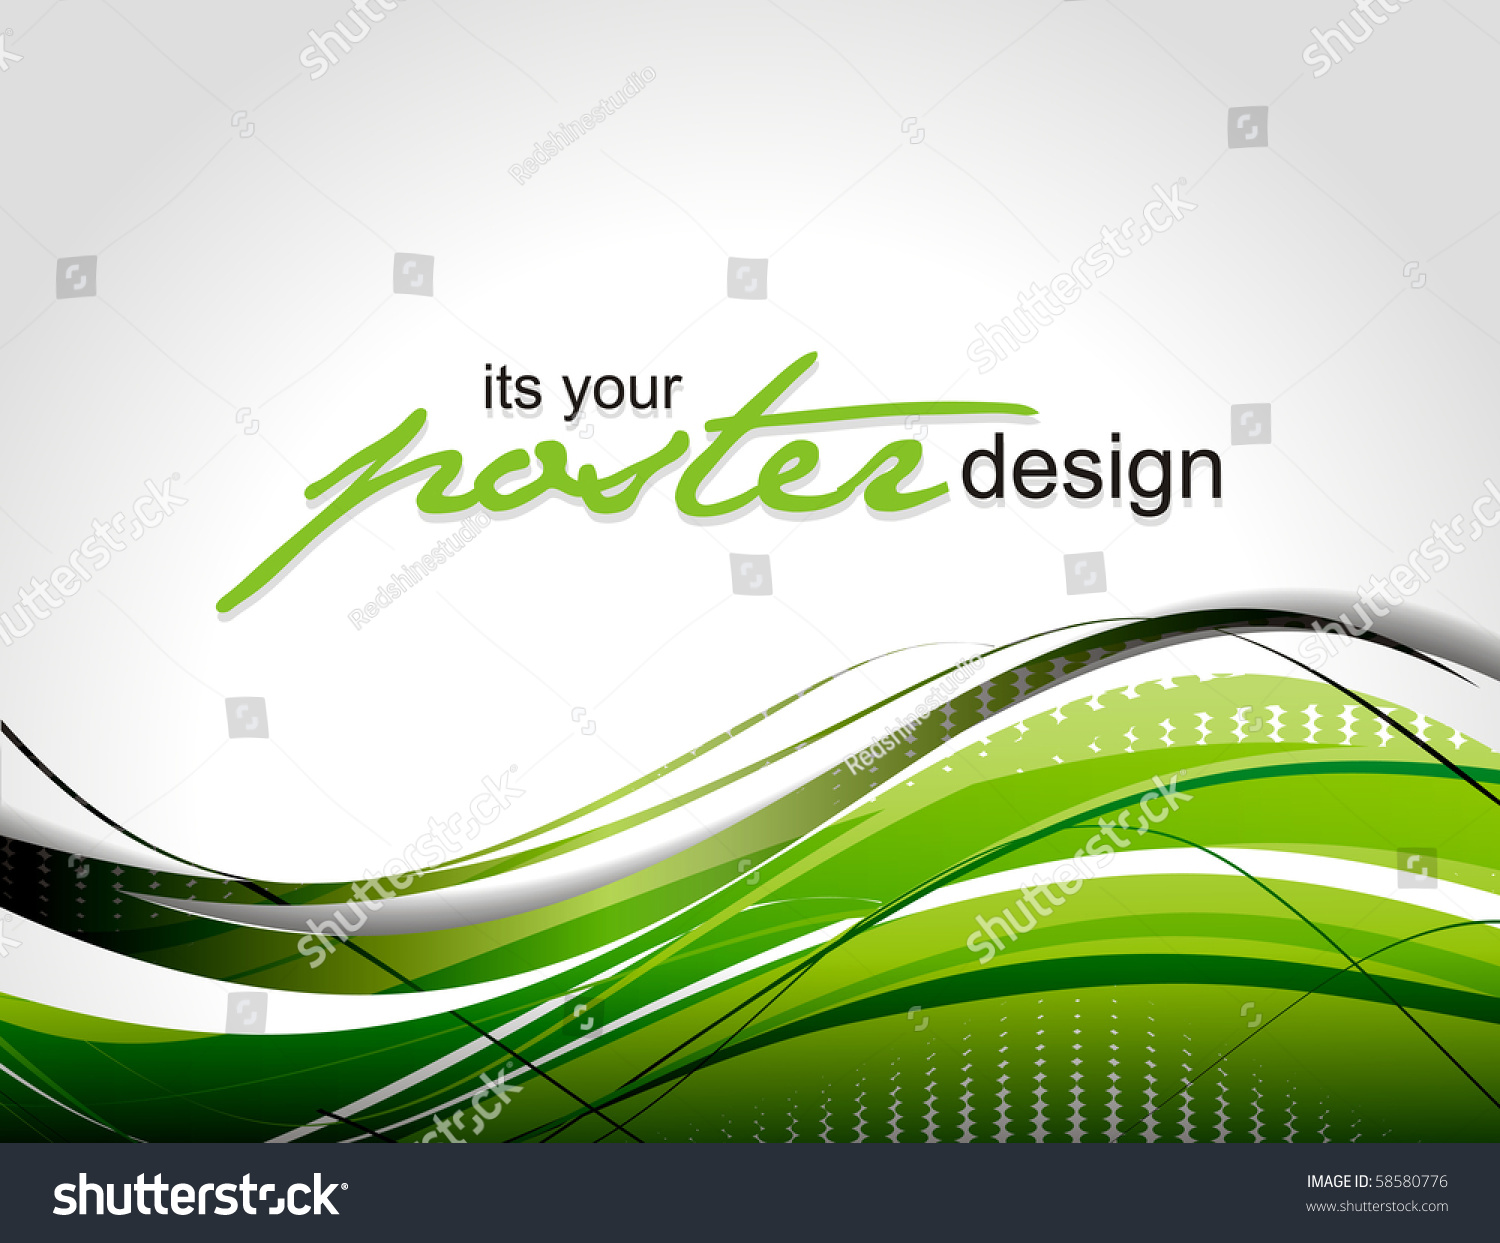 Abstract Background With Poster Design For Text Project ...